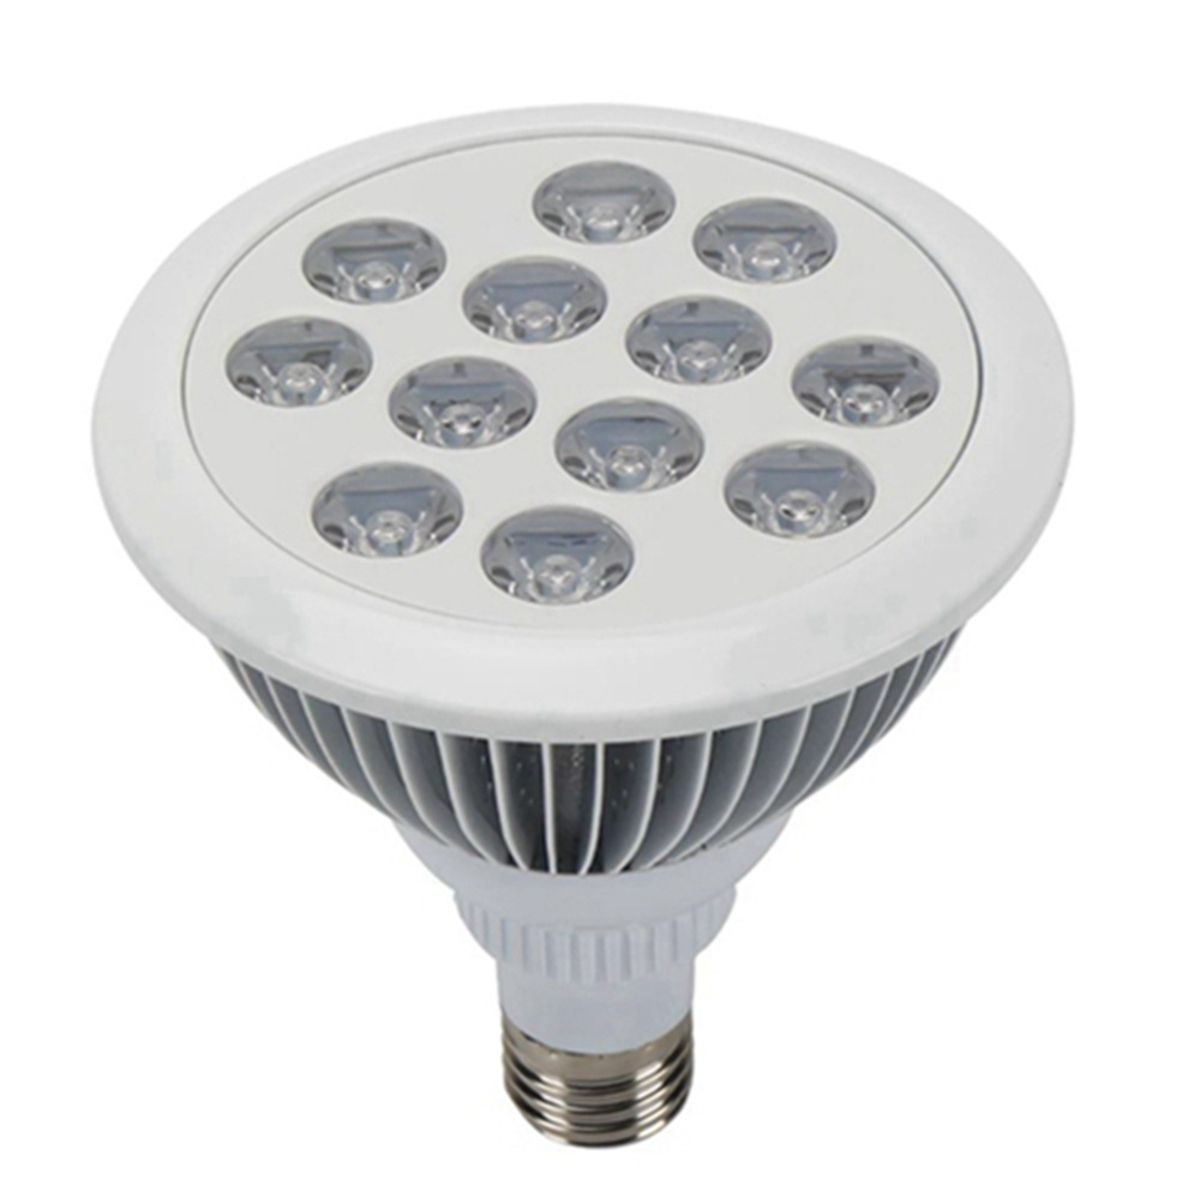 12W-24W-54W-E27-LED-Light-Therapy-Bulb-660nm-Deep-Red--850nm-Near-Infrared-Combo-for-Health-Beauty-1635627